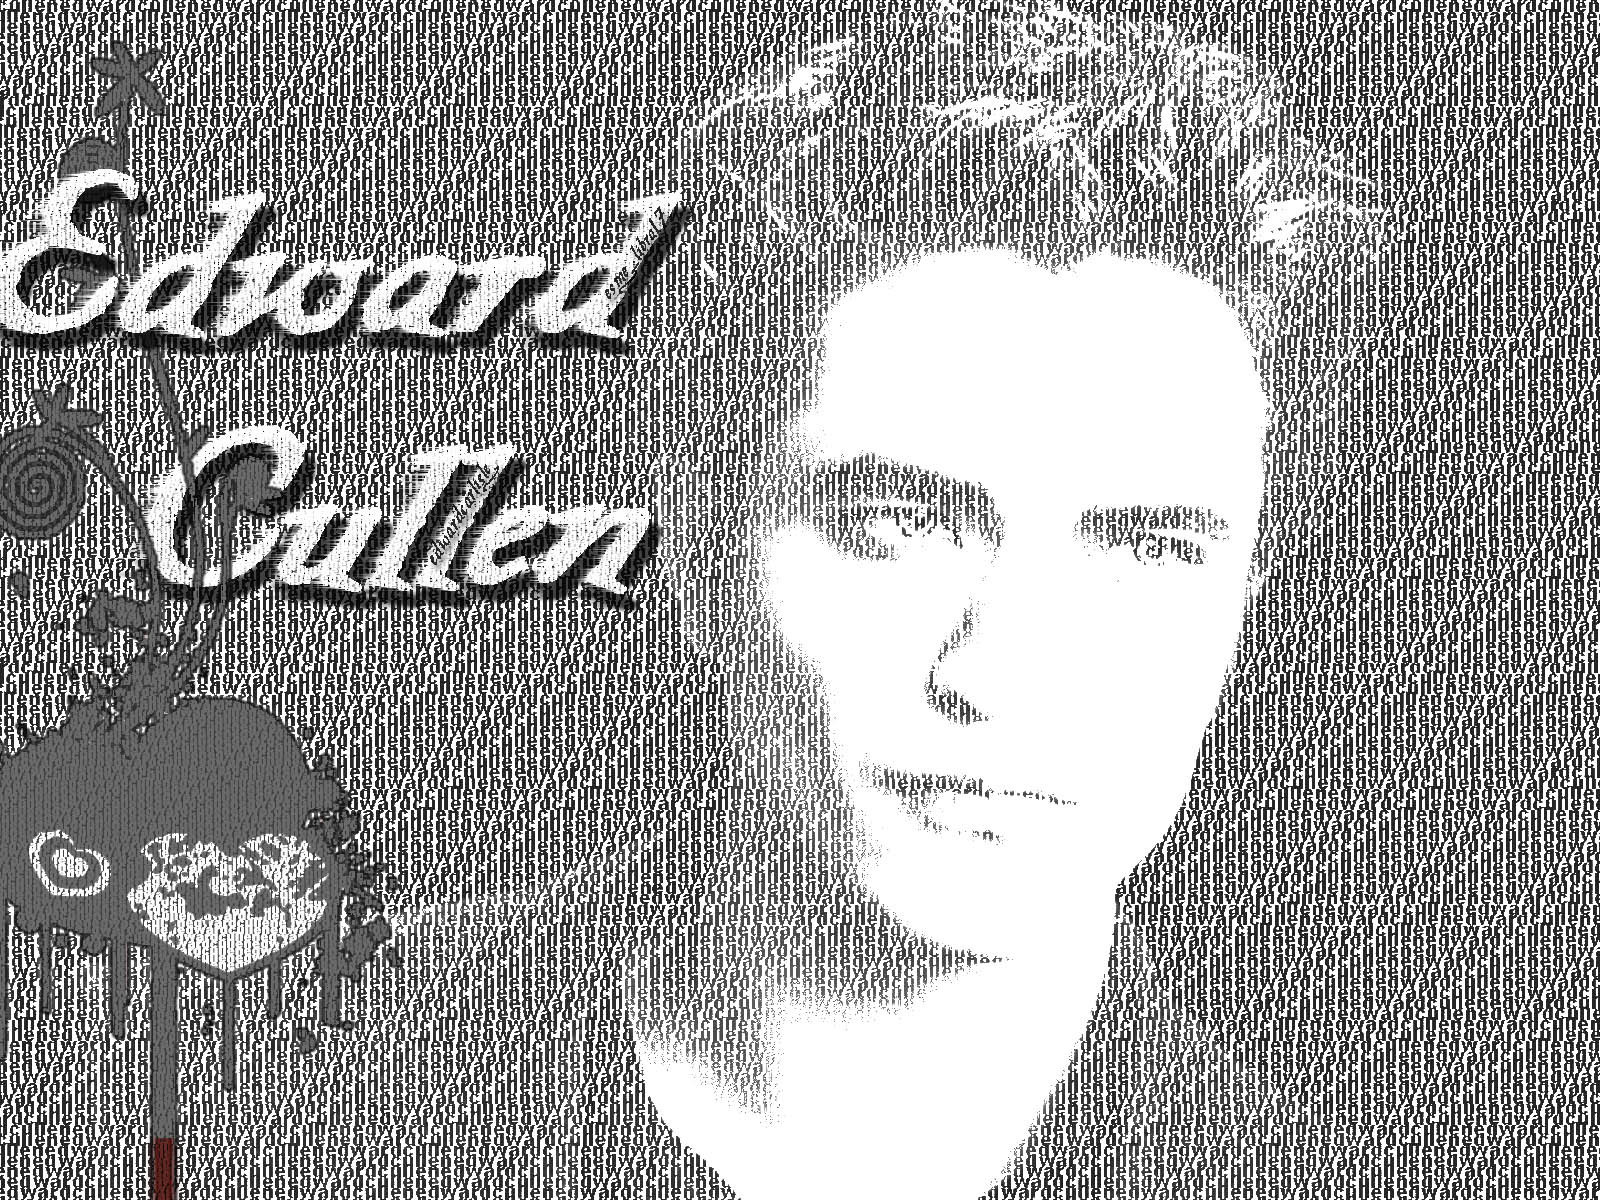 Exclusive Here How Many Edward S Name Can U See Guess - Monochrome - HD Wallpaper 